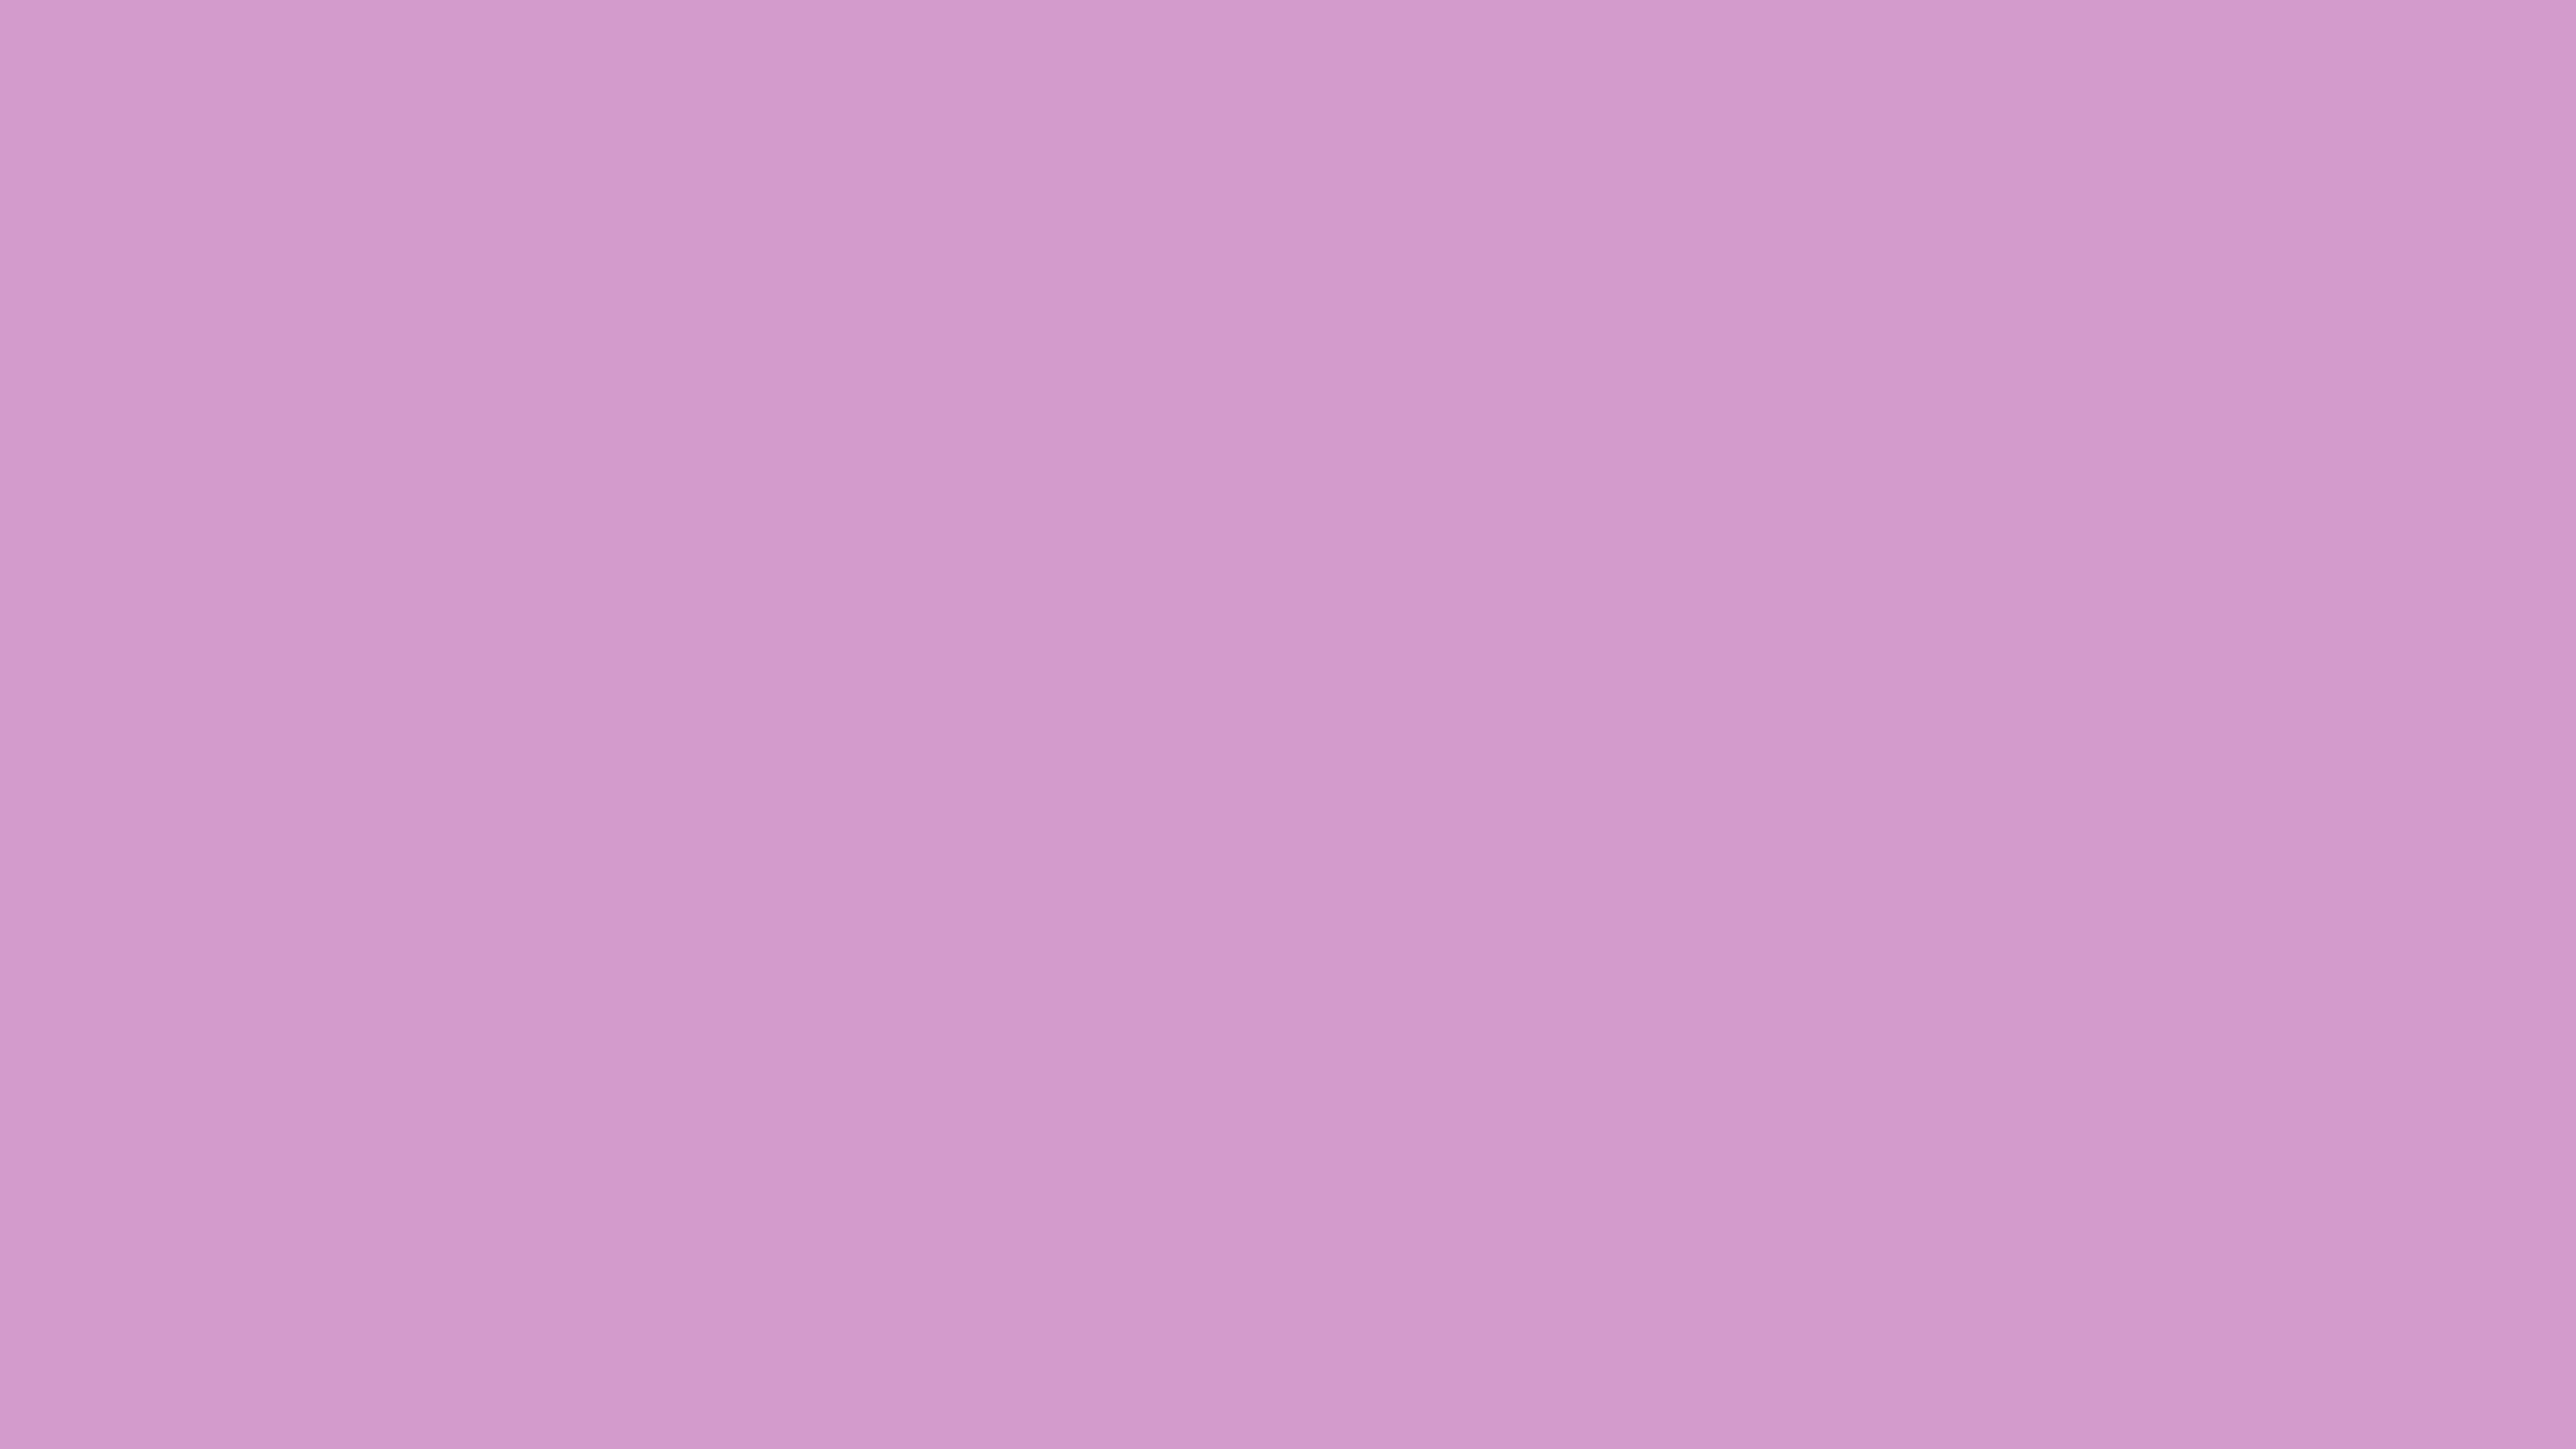 7680x4320 Light Medium Orchid Solid Color Background